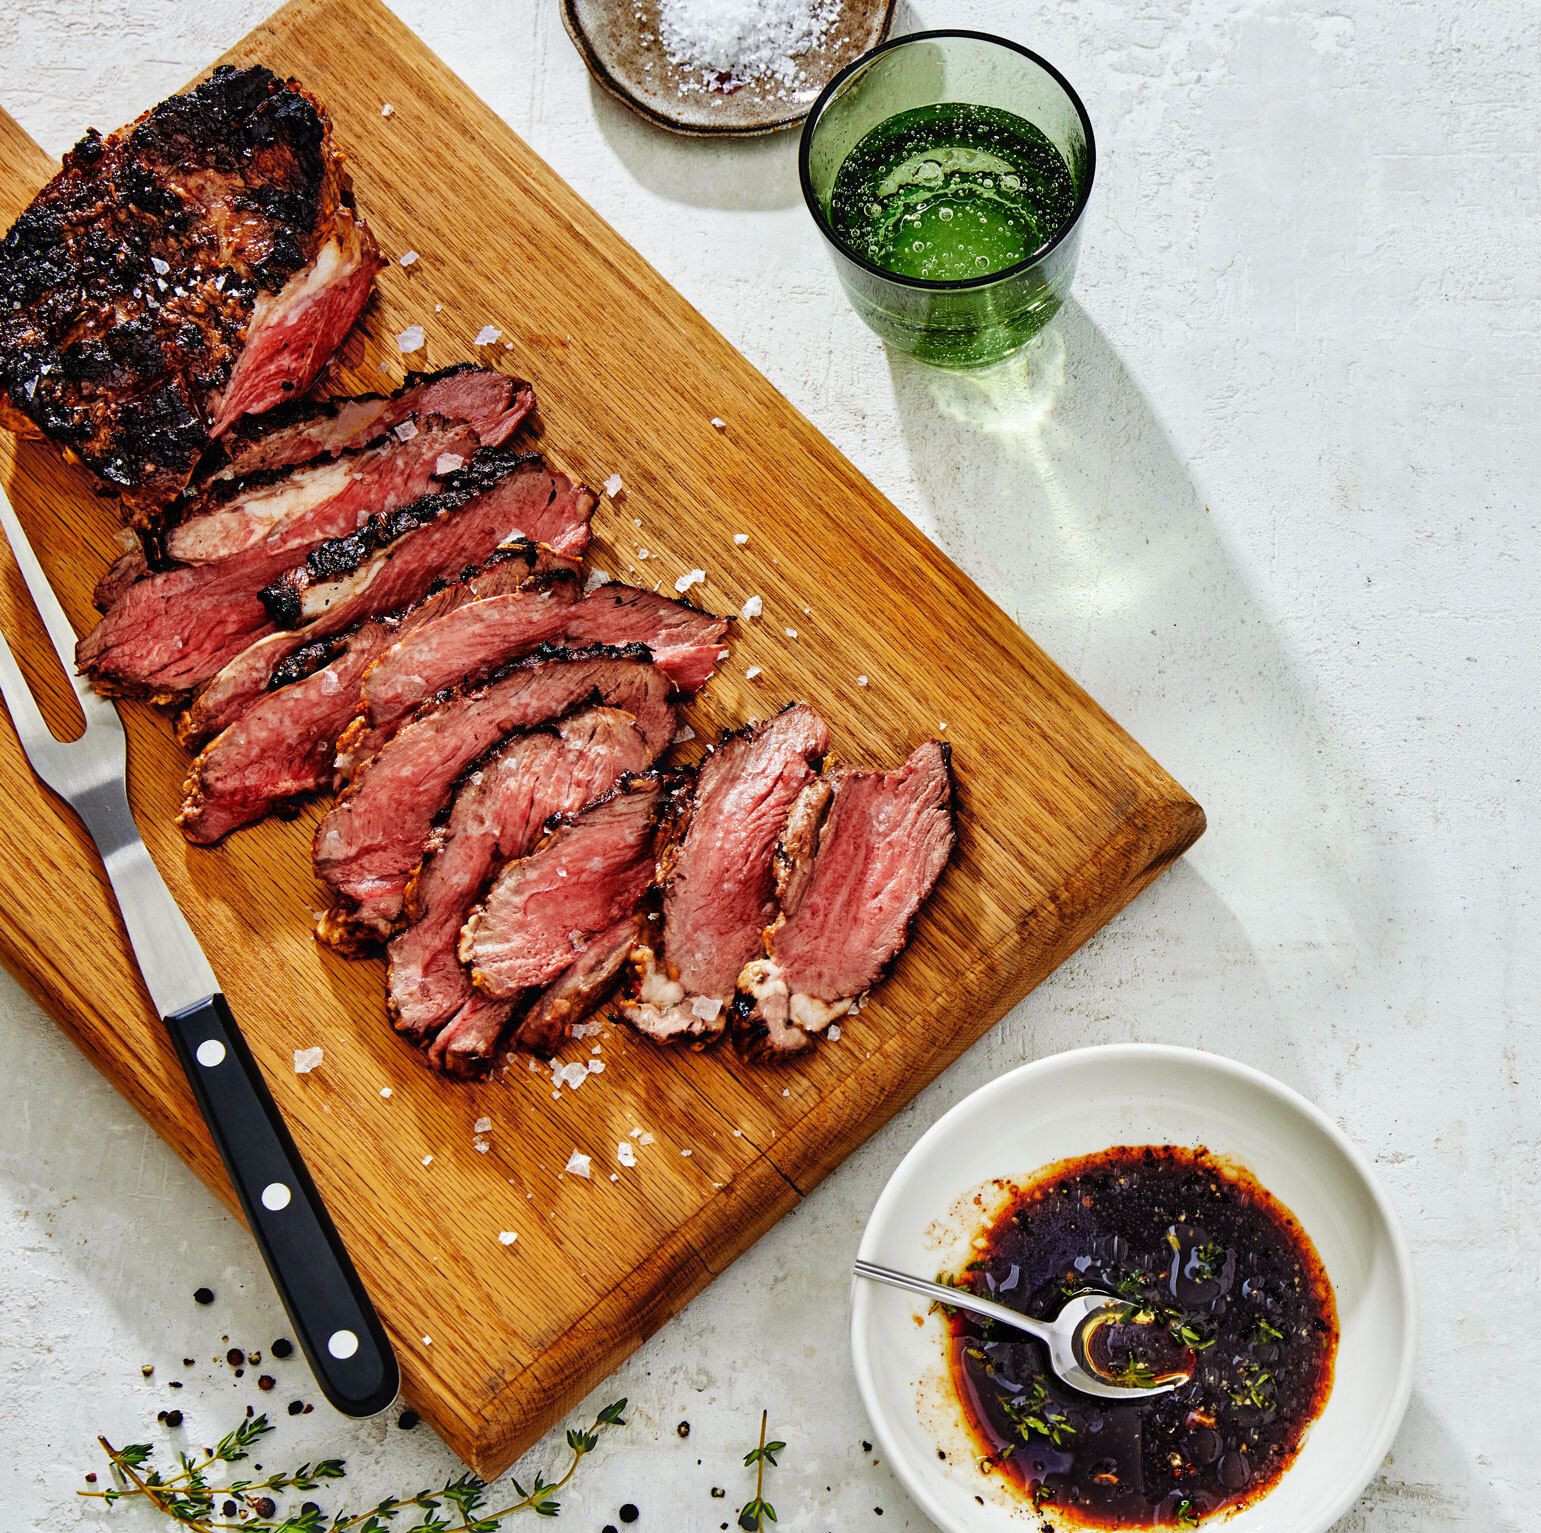 This Grilled Lamb Recipe Is Loaded With Protein and Flavor